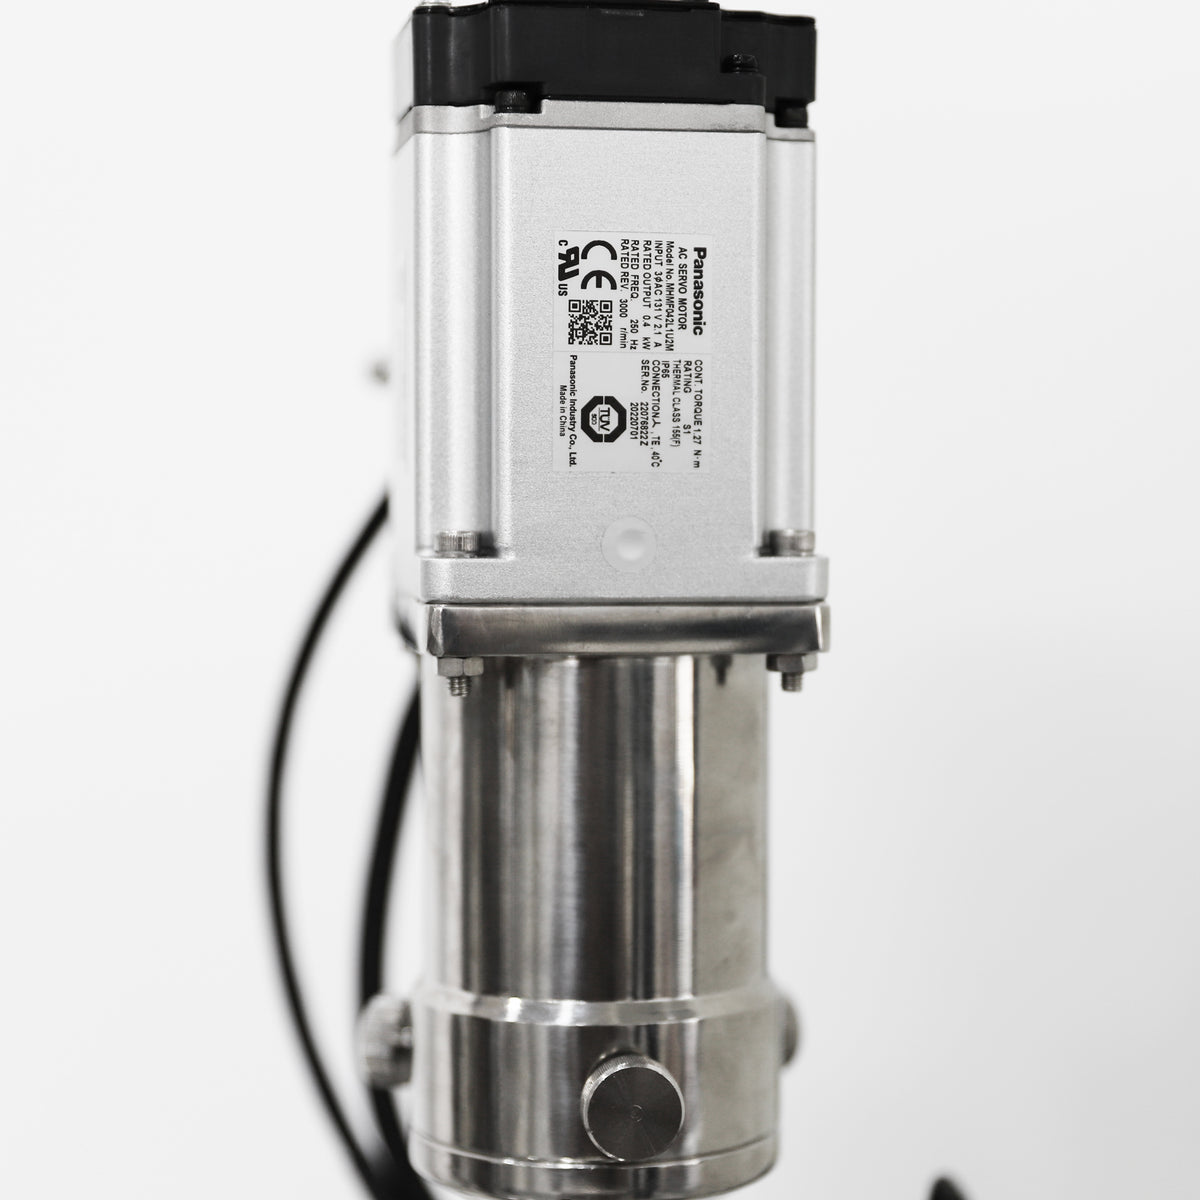 5L Benchtop Bioreactor for Microbial Fermentation with 2 Gas Inlets BR100-M1